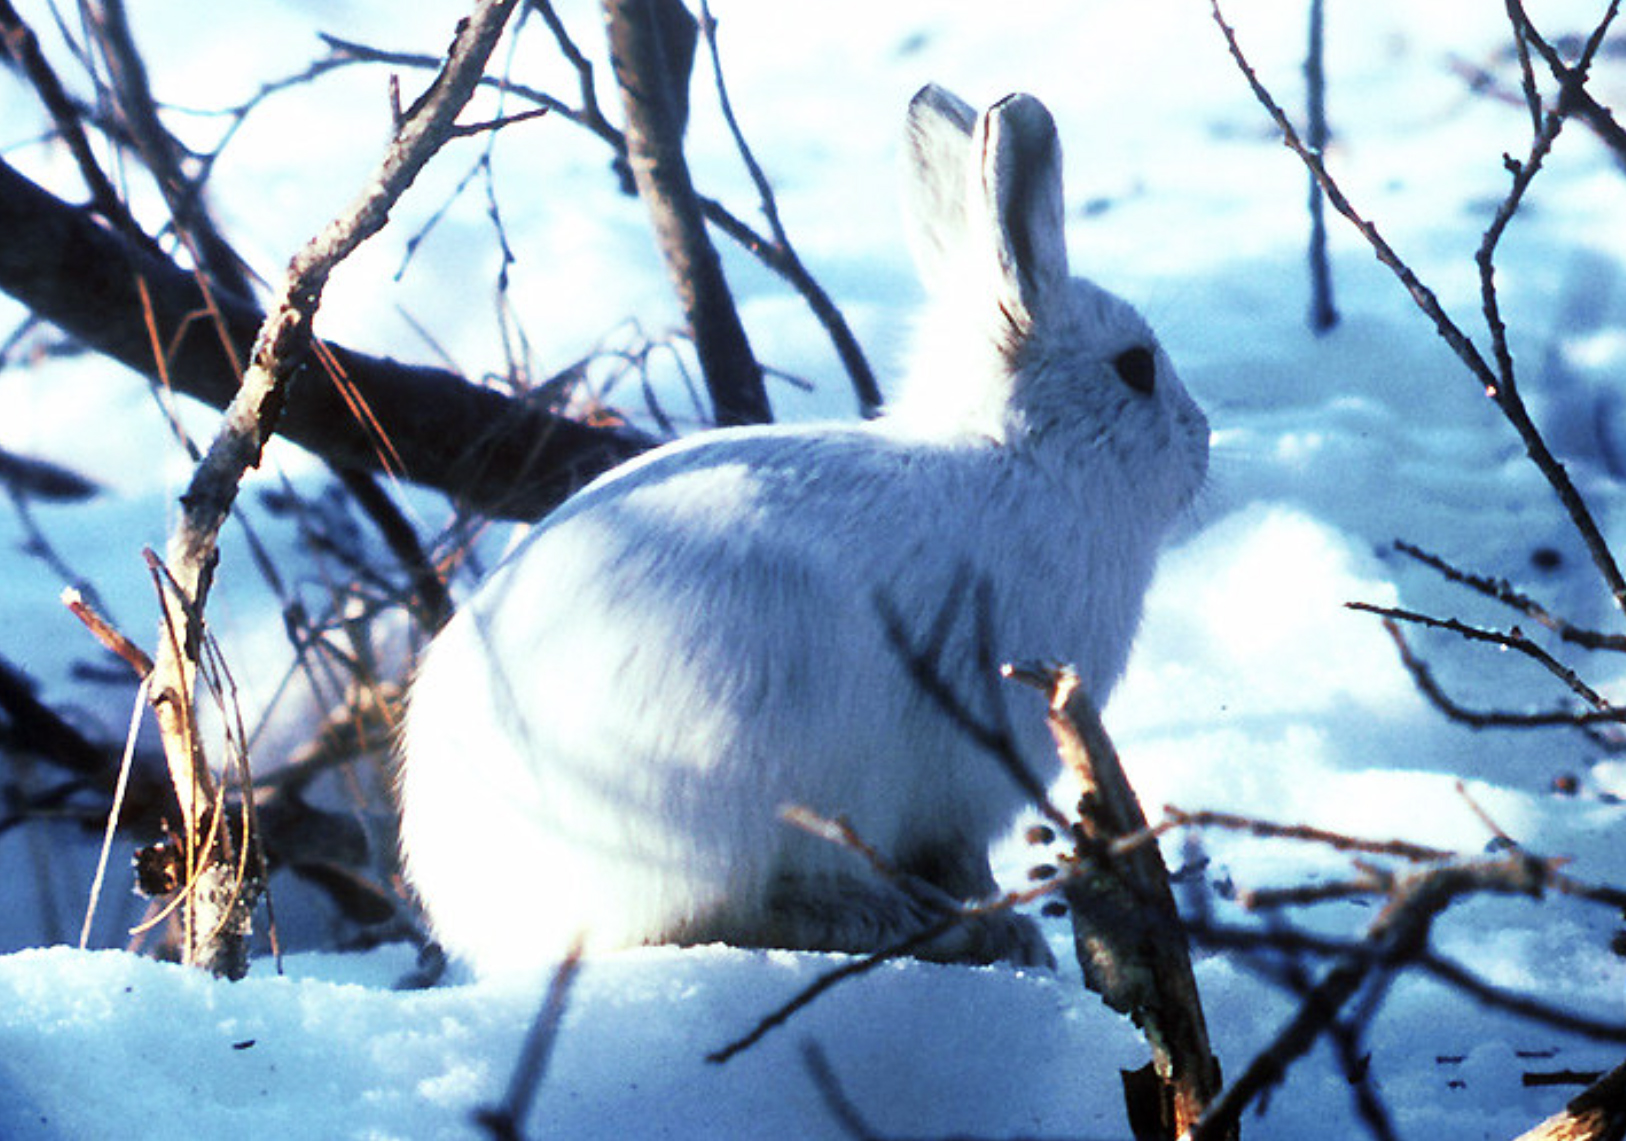 Arctic hares like this one are larger than snowshoe hares.